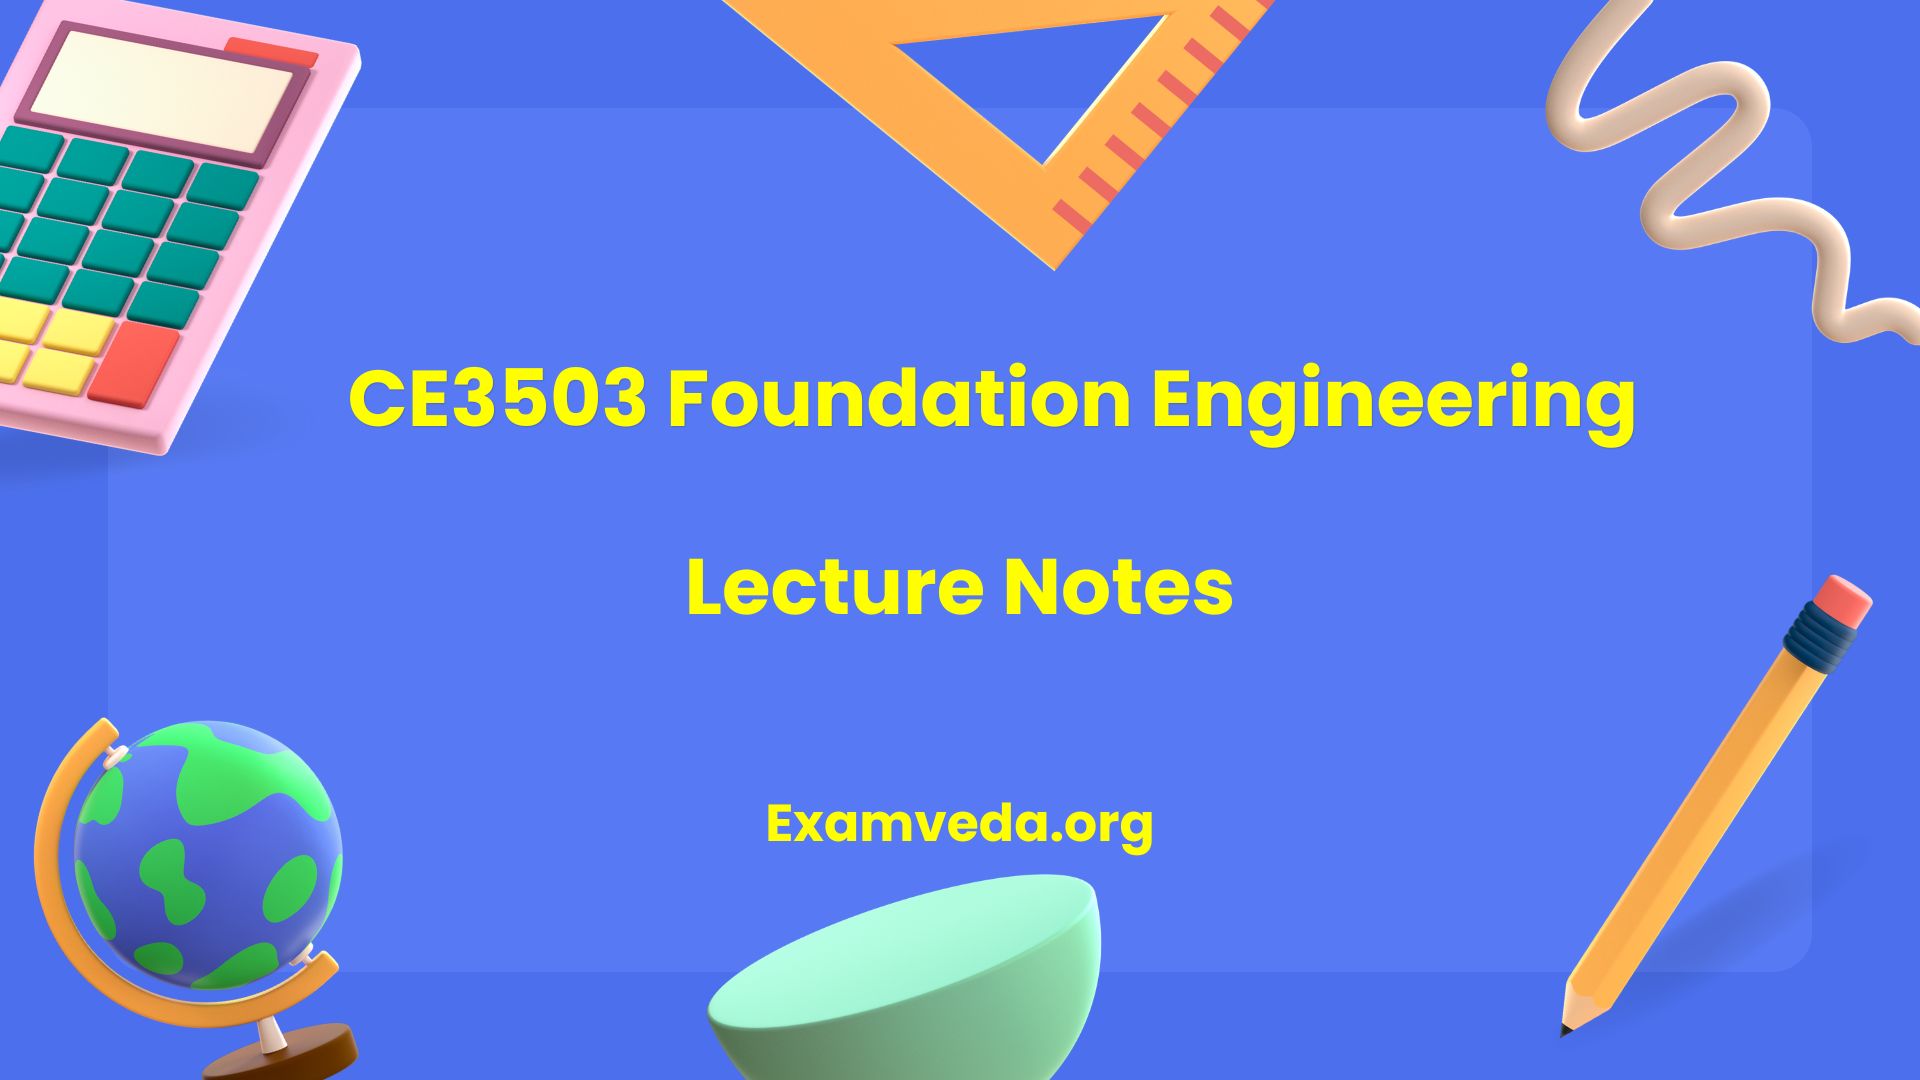 CE3503 Foundation Engineering Lecture Notes